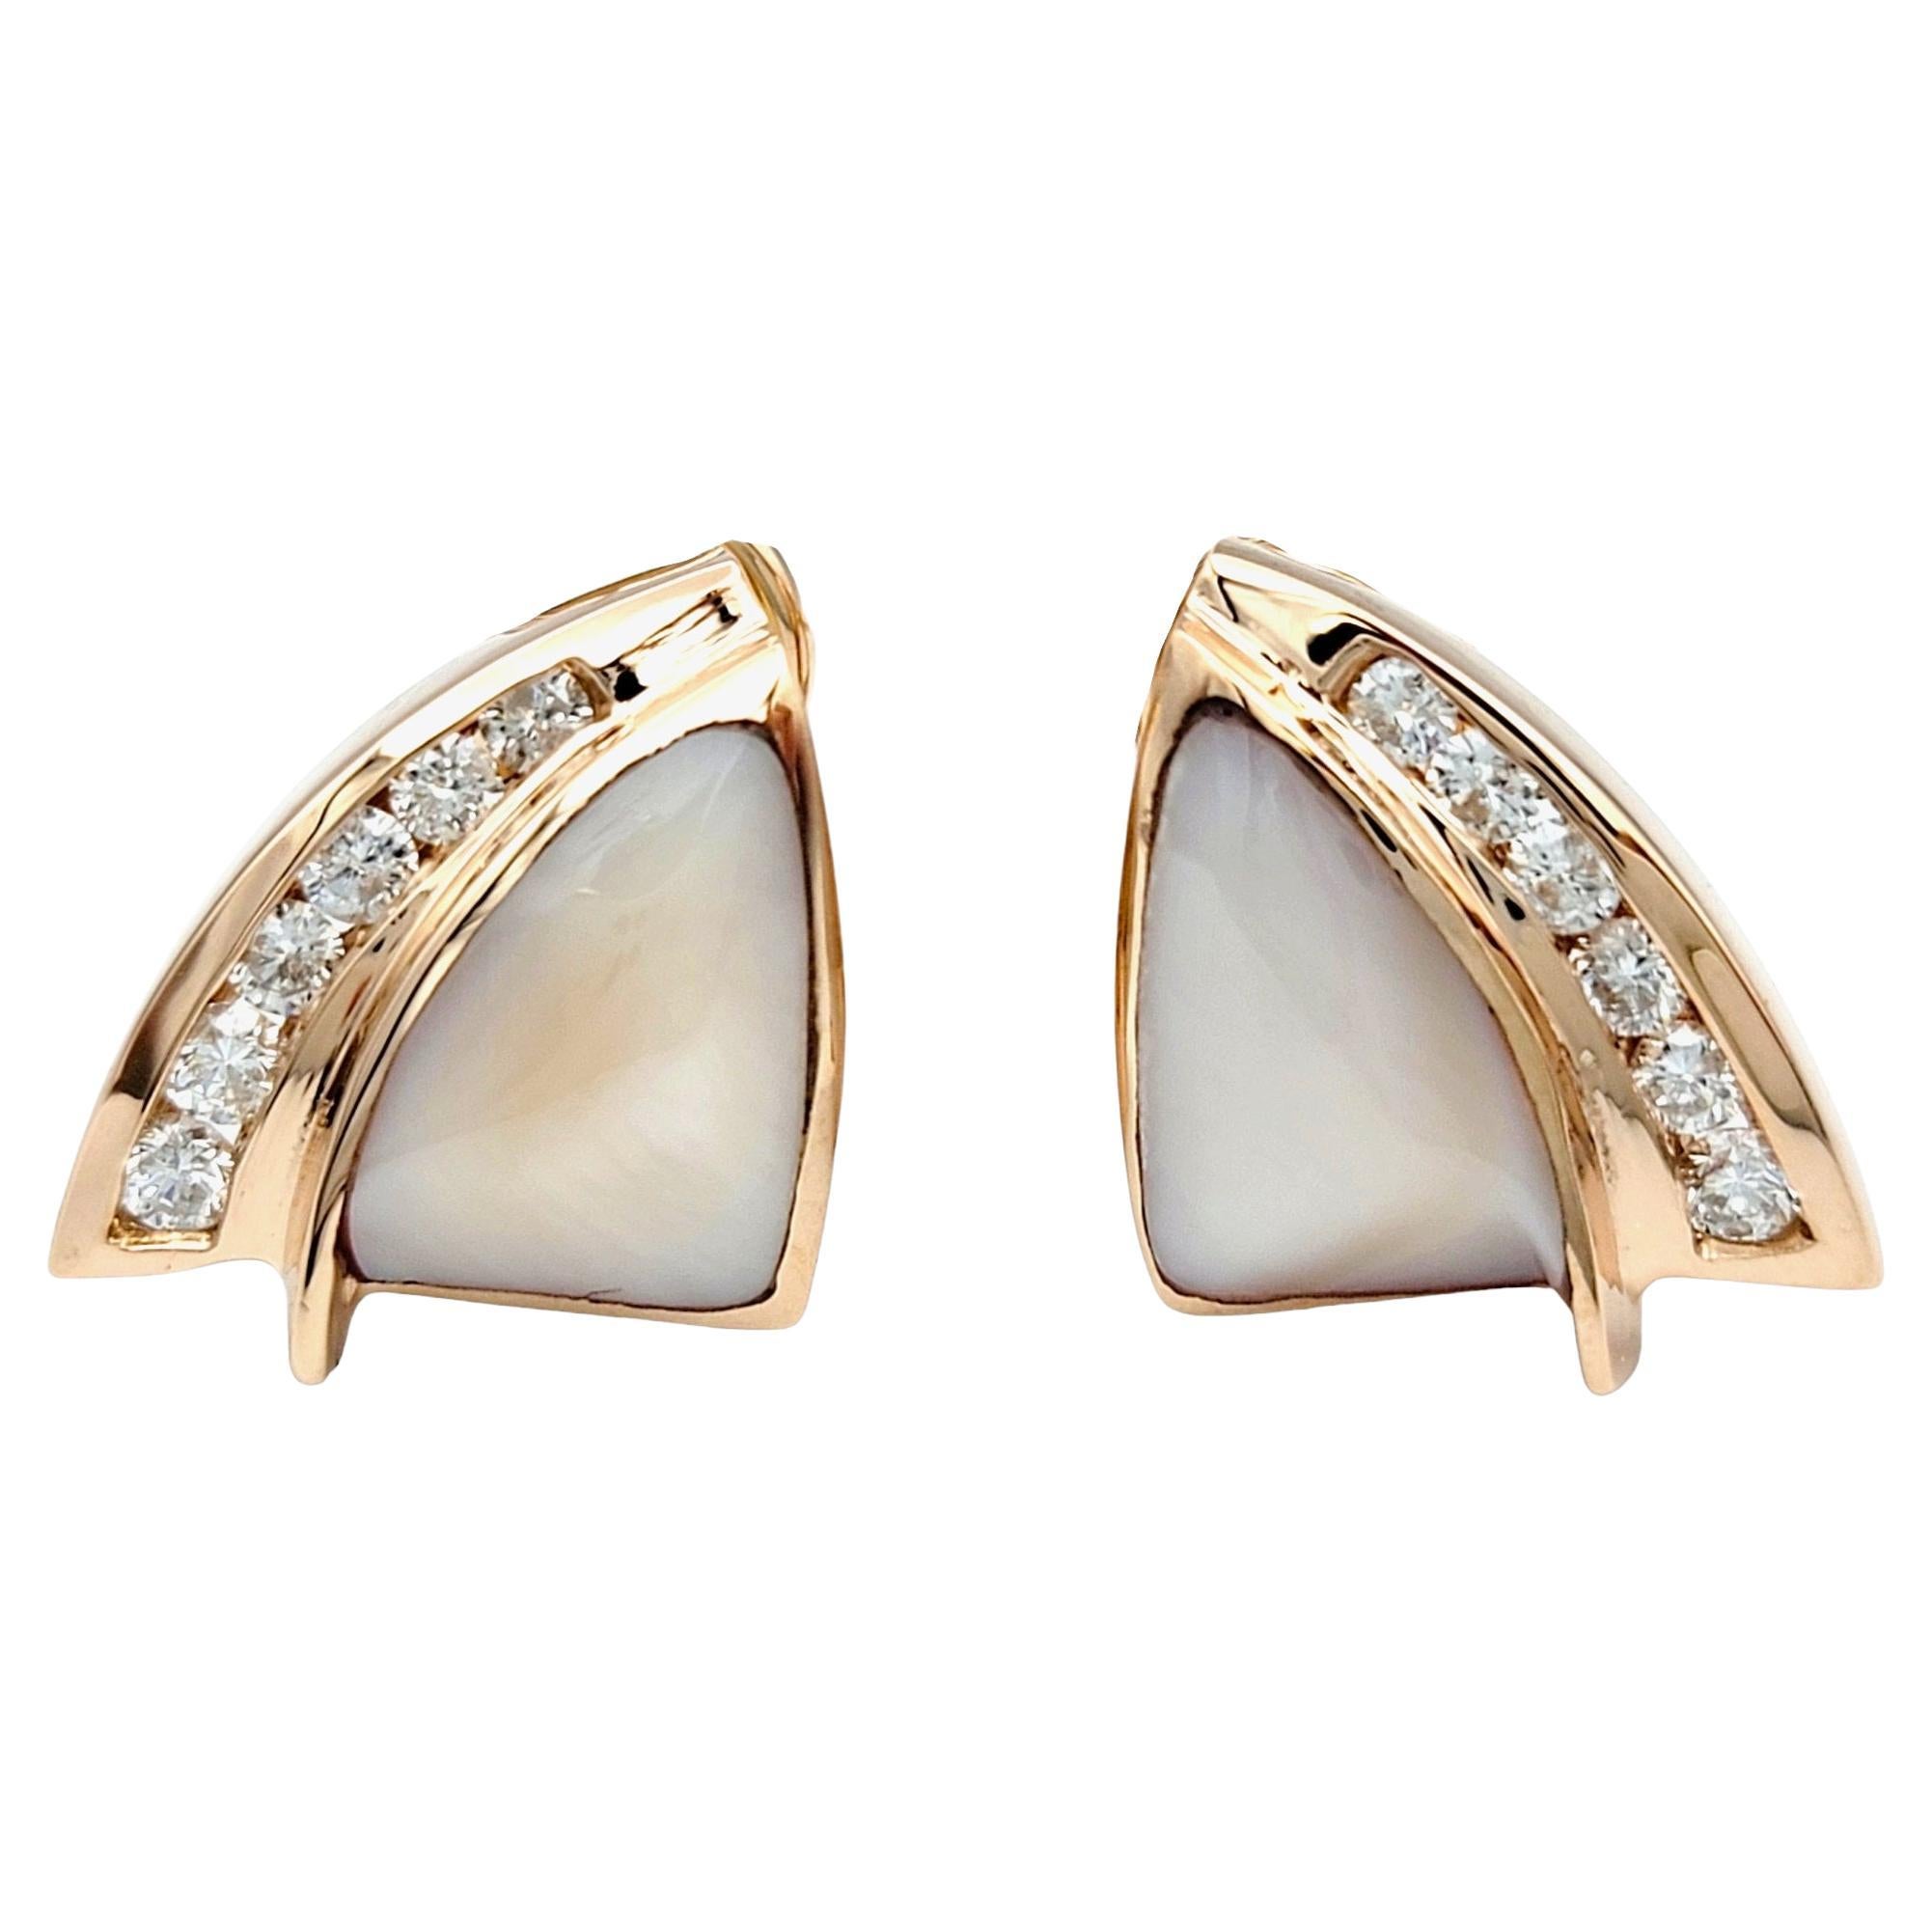 These elegant earrings exude timeless sophistication. Set in warm rose gold, each earring features a luminous mother of pearl gemstone, delicately paired with a row of sparkling diamonds. The soft, iridescent glow of the mother of pearl gemstones